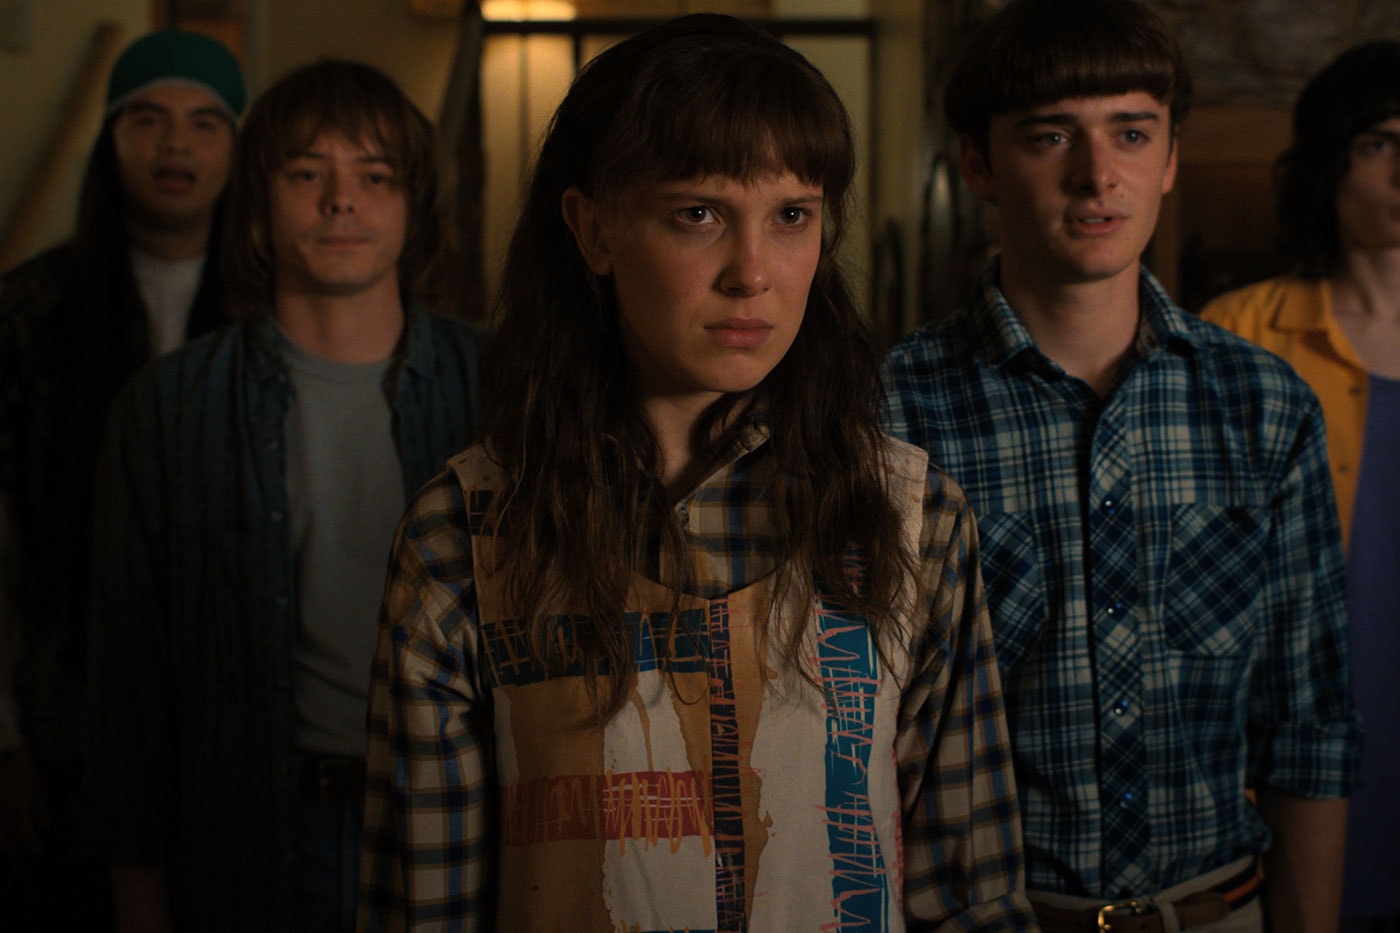 Stranger Things Season 4 Reportedly Had a Budget of $30 Million USD per Episode